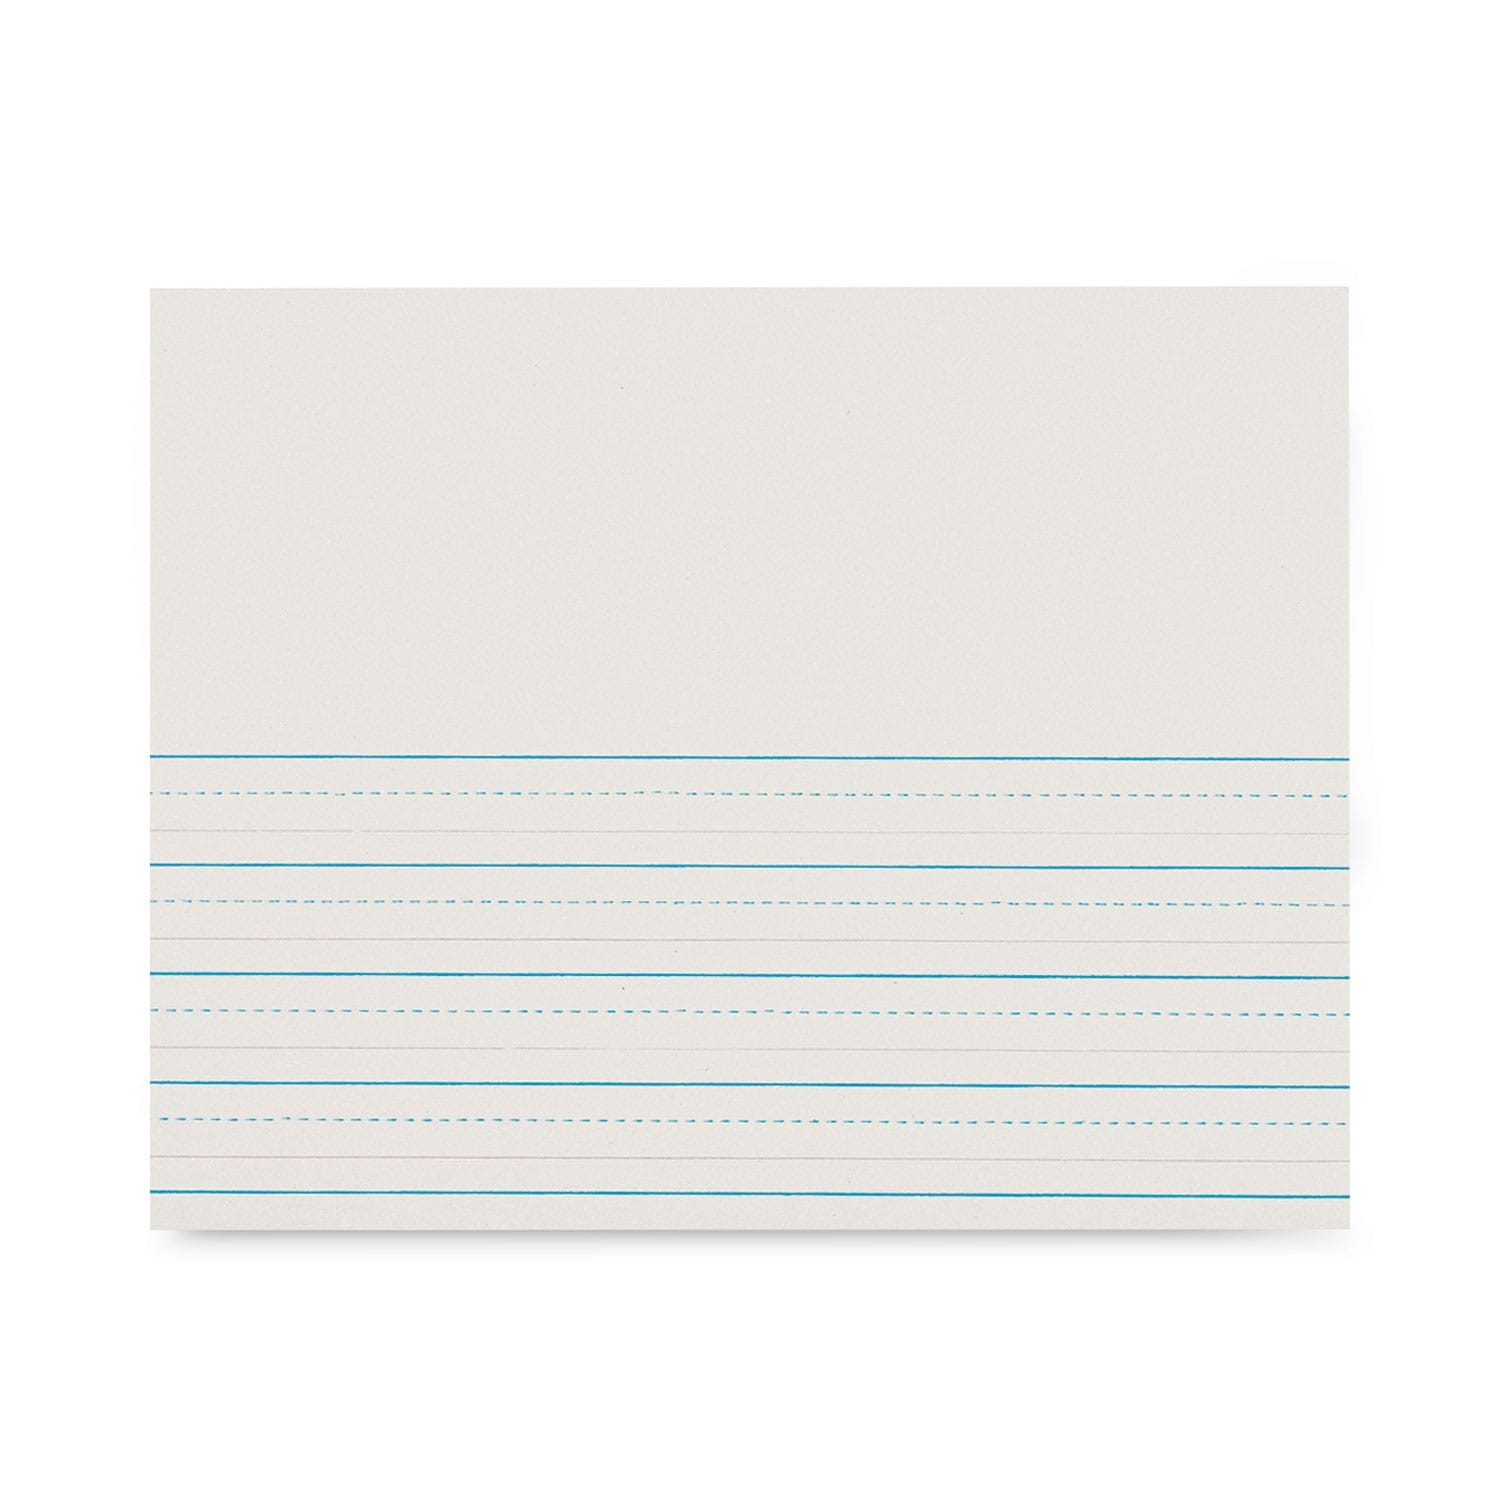 Multi-Program Picture Story Paper 8.5 x 11 500/Pac...